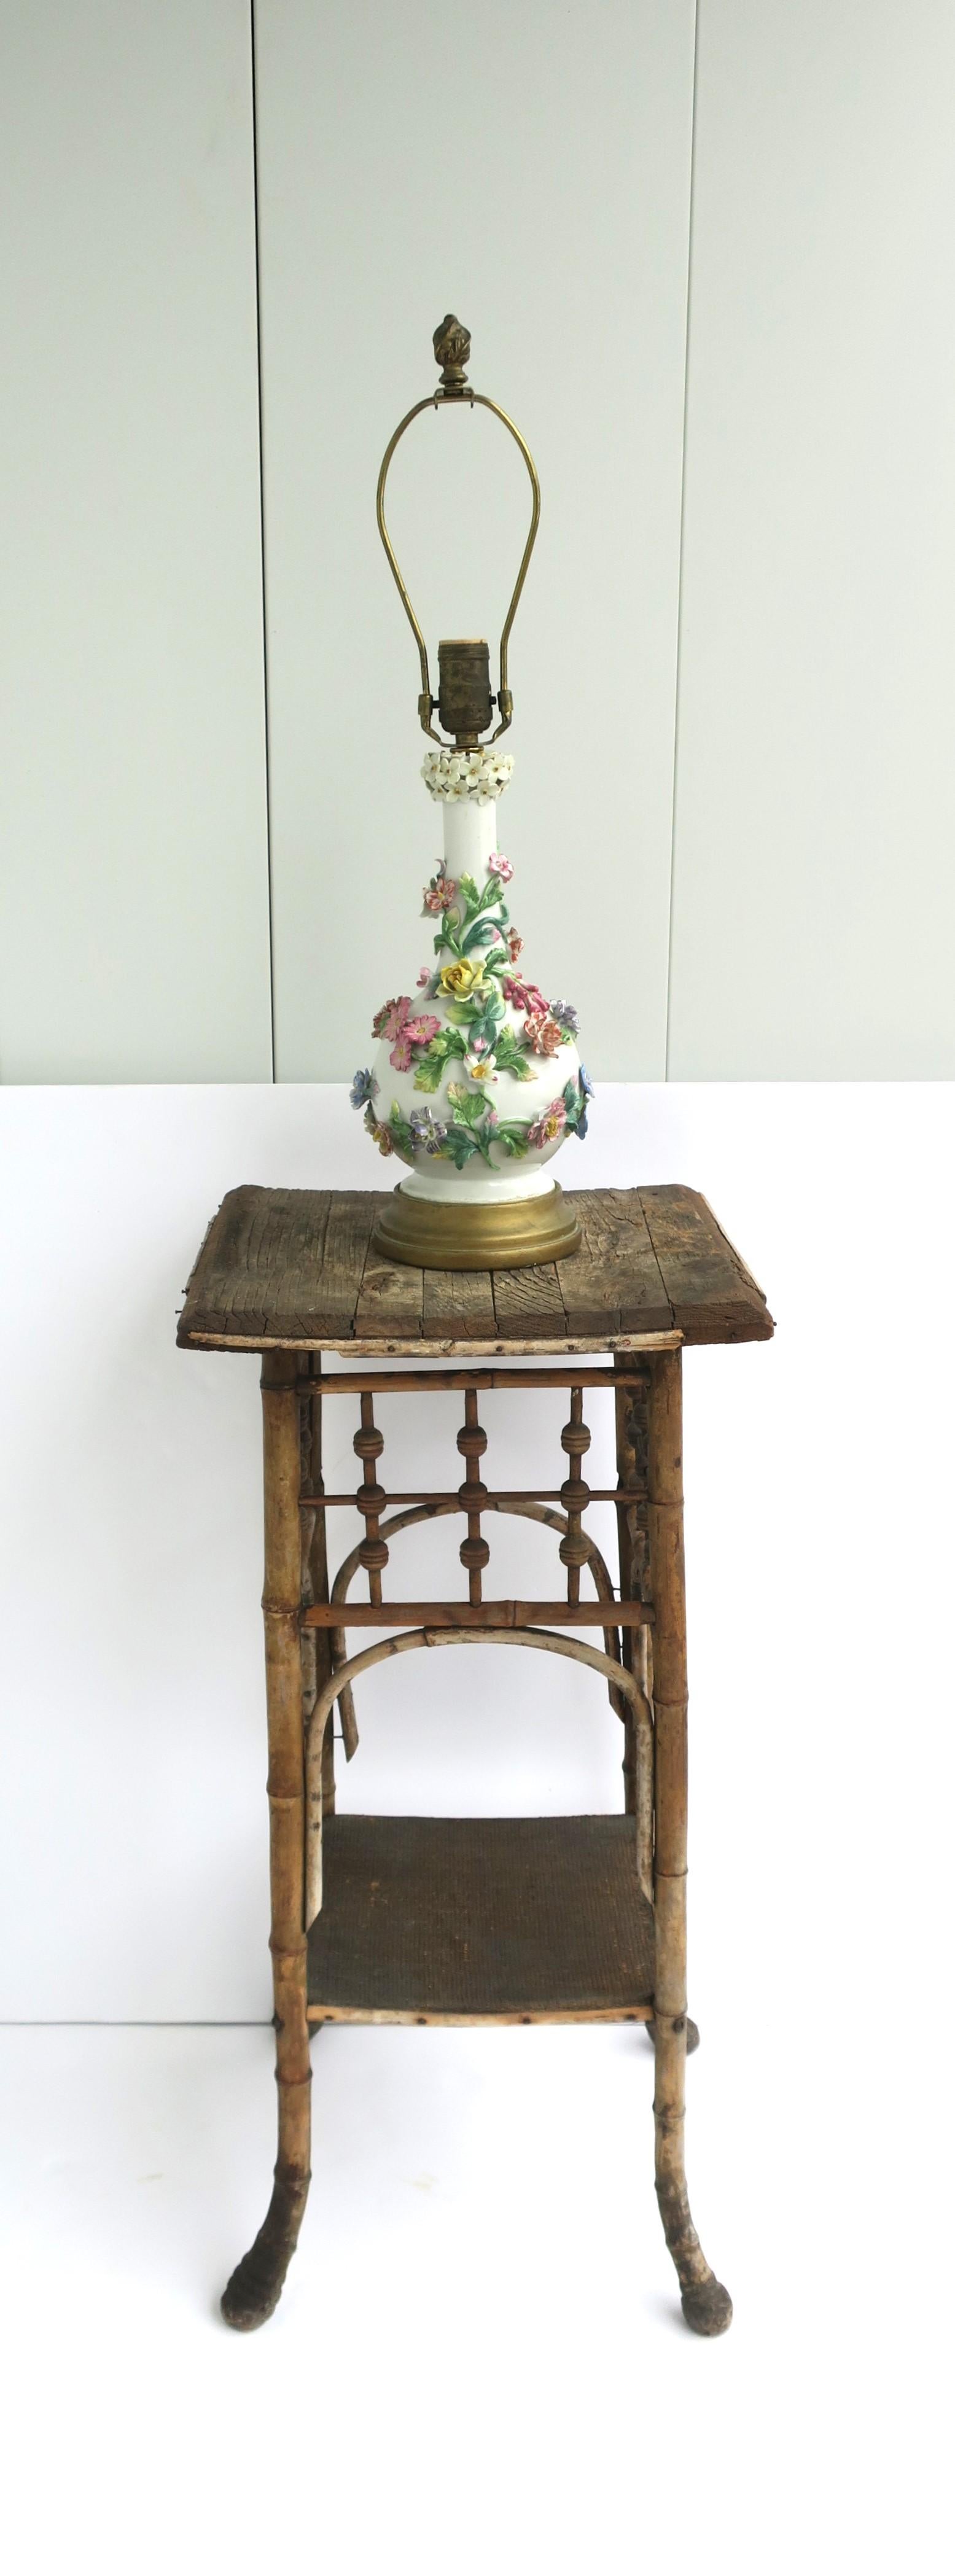 Italian White Porcelain Lamp with Colorful Flowers, Leaves & Vines Capo di Monte For Sale 3